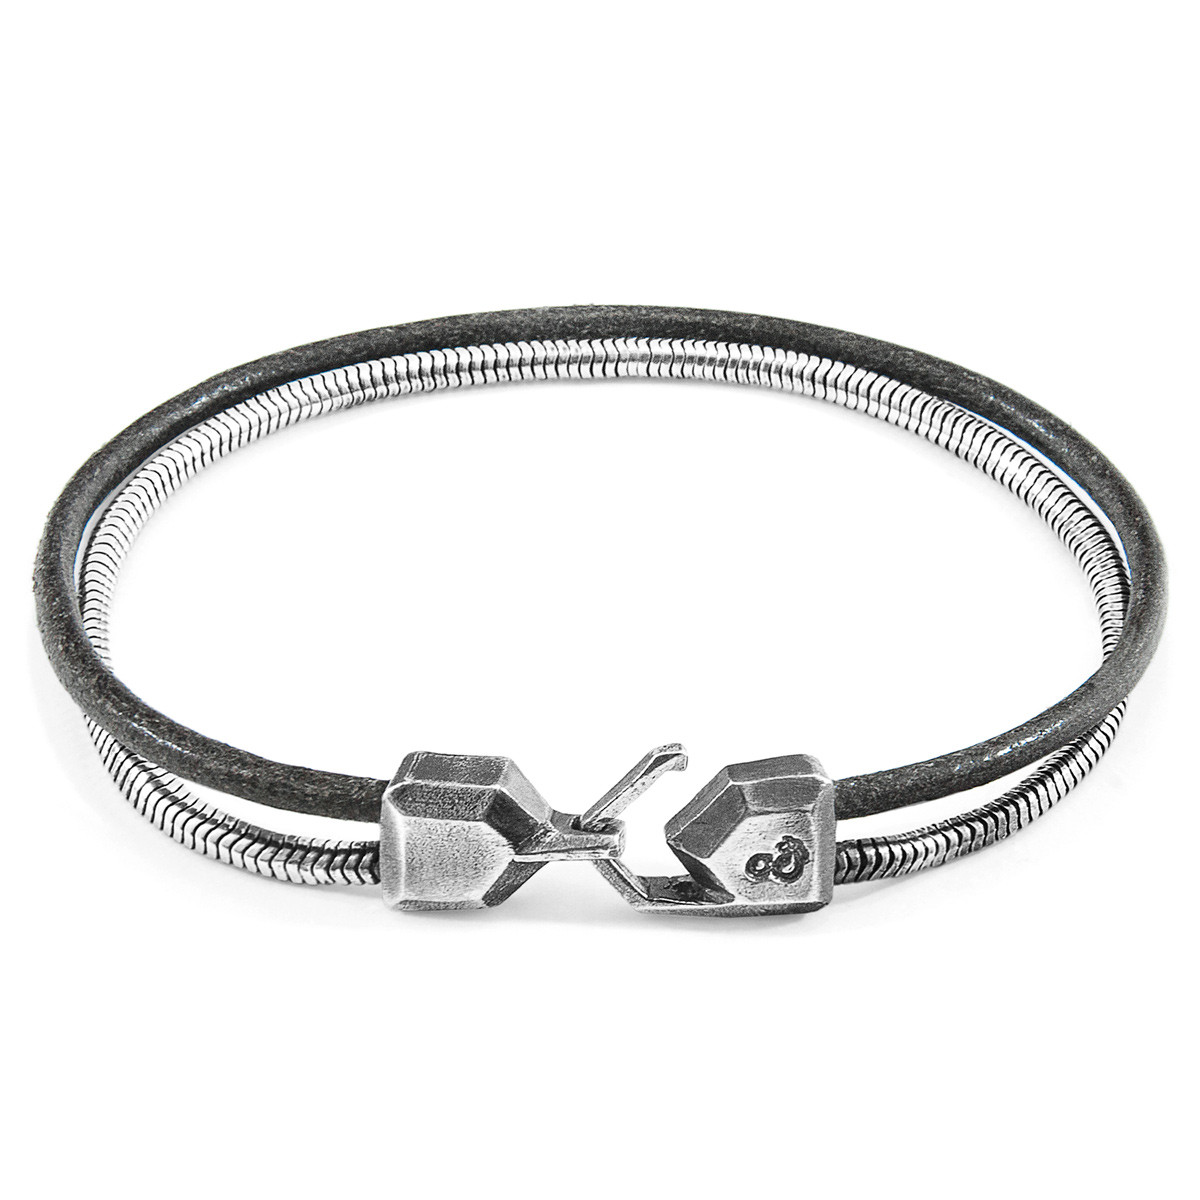 Anchor & Crew Shadow Grey Gallant Mast Silver and Round Leather Bracelet 